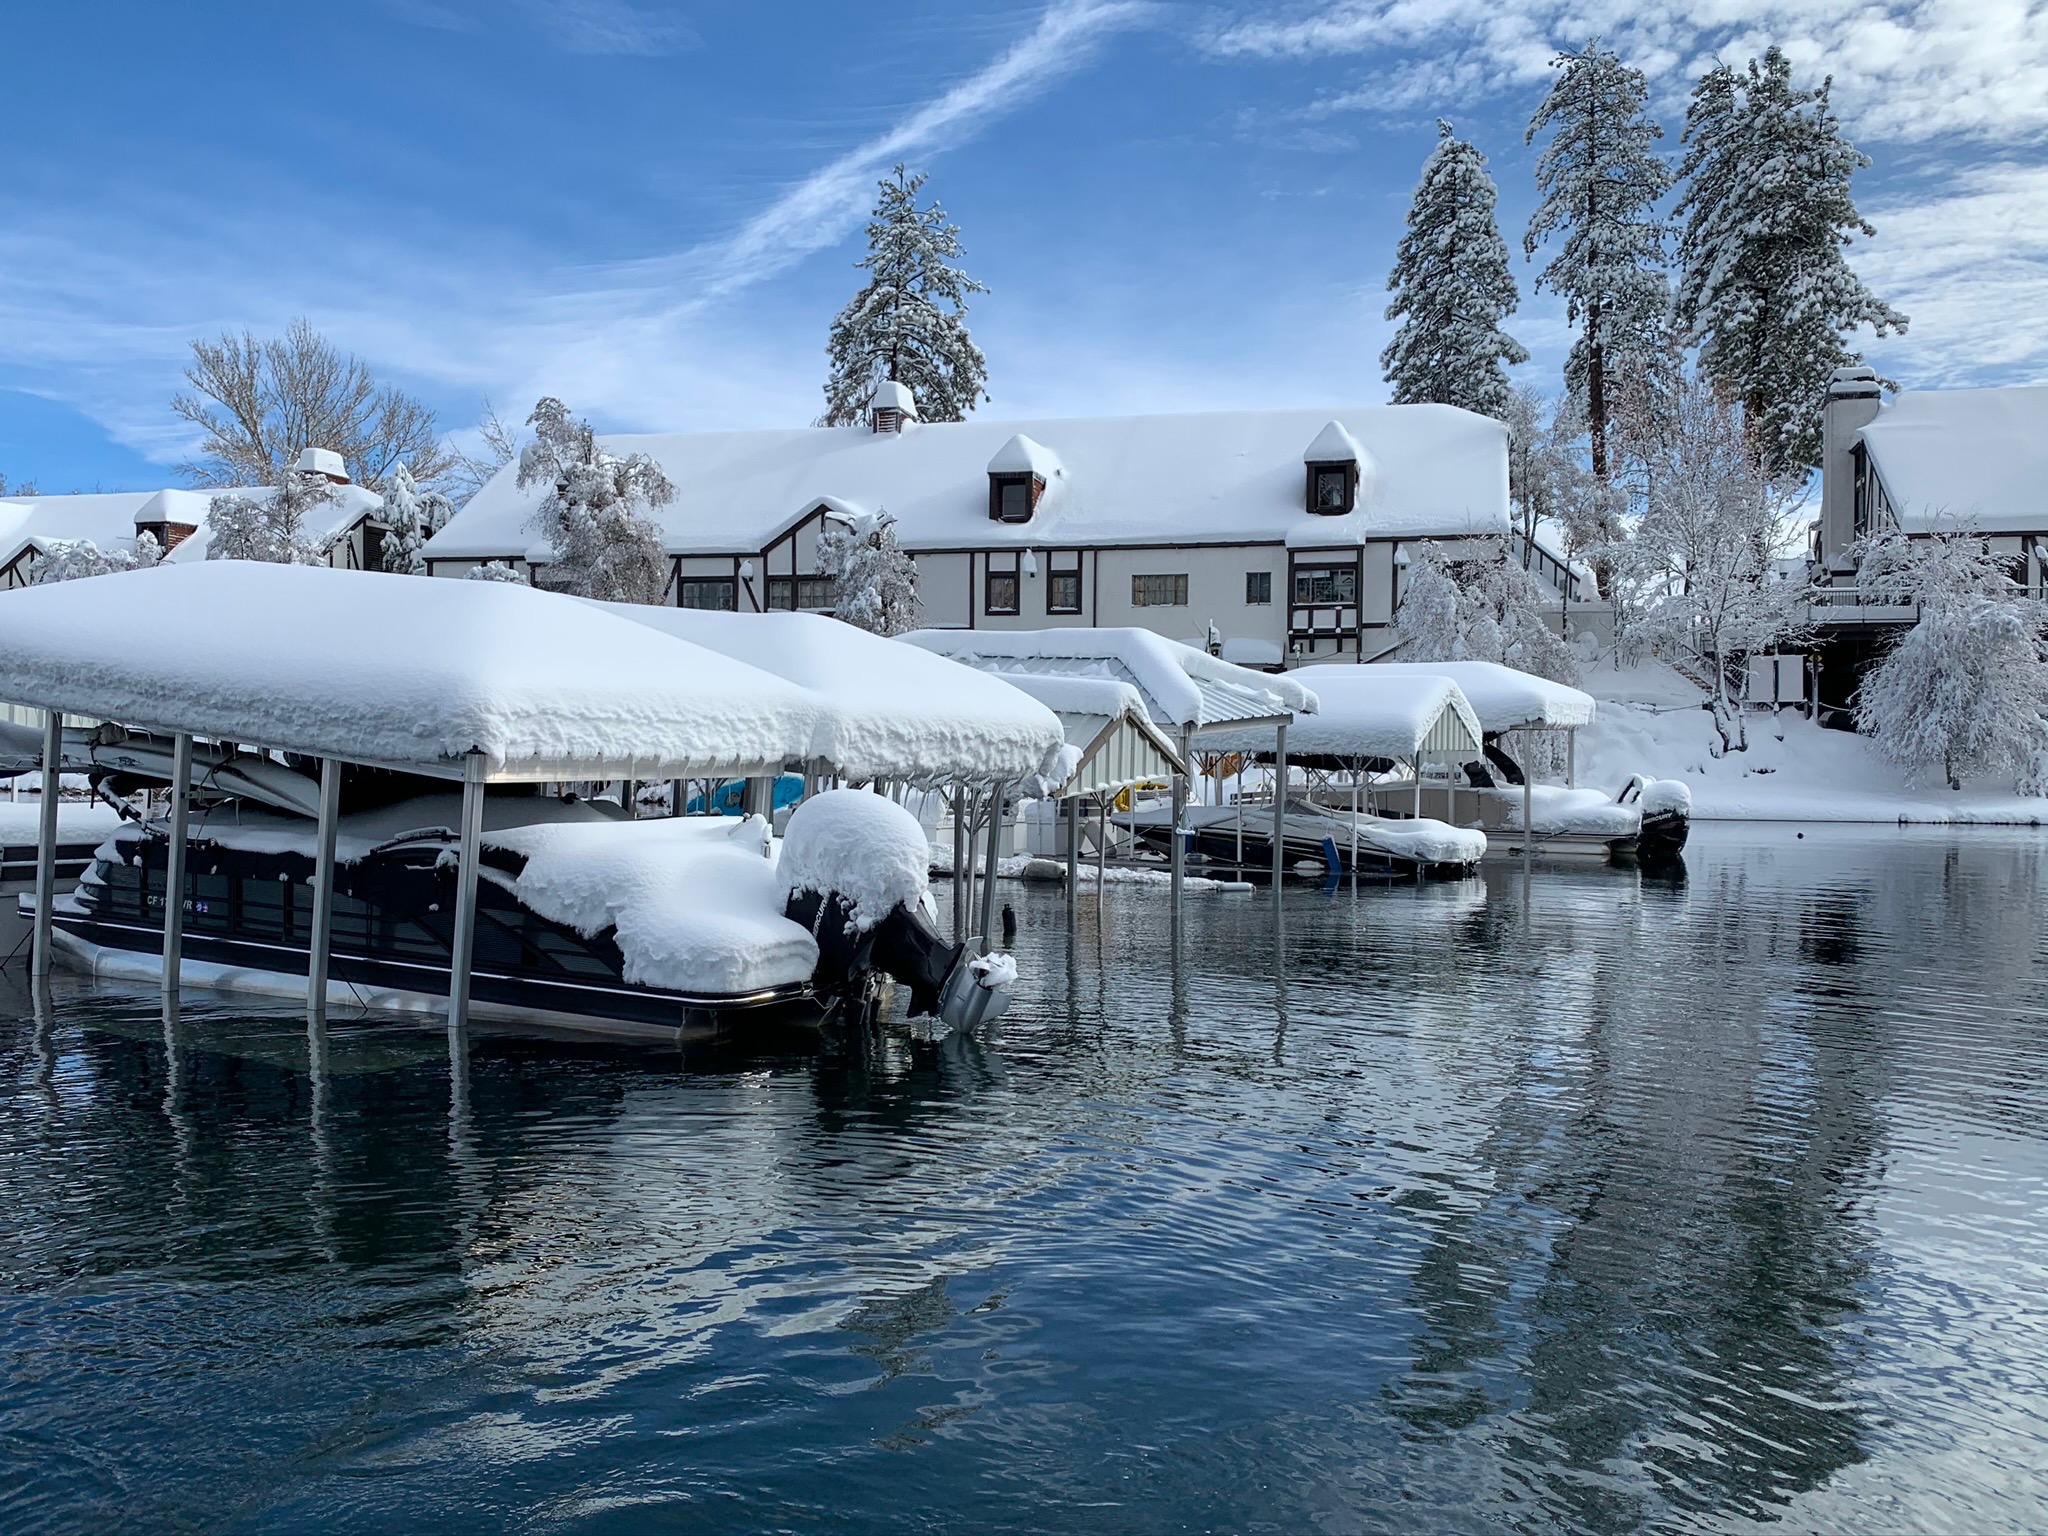 Snow Covered Dock Submerged in Lake